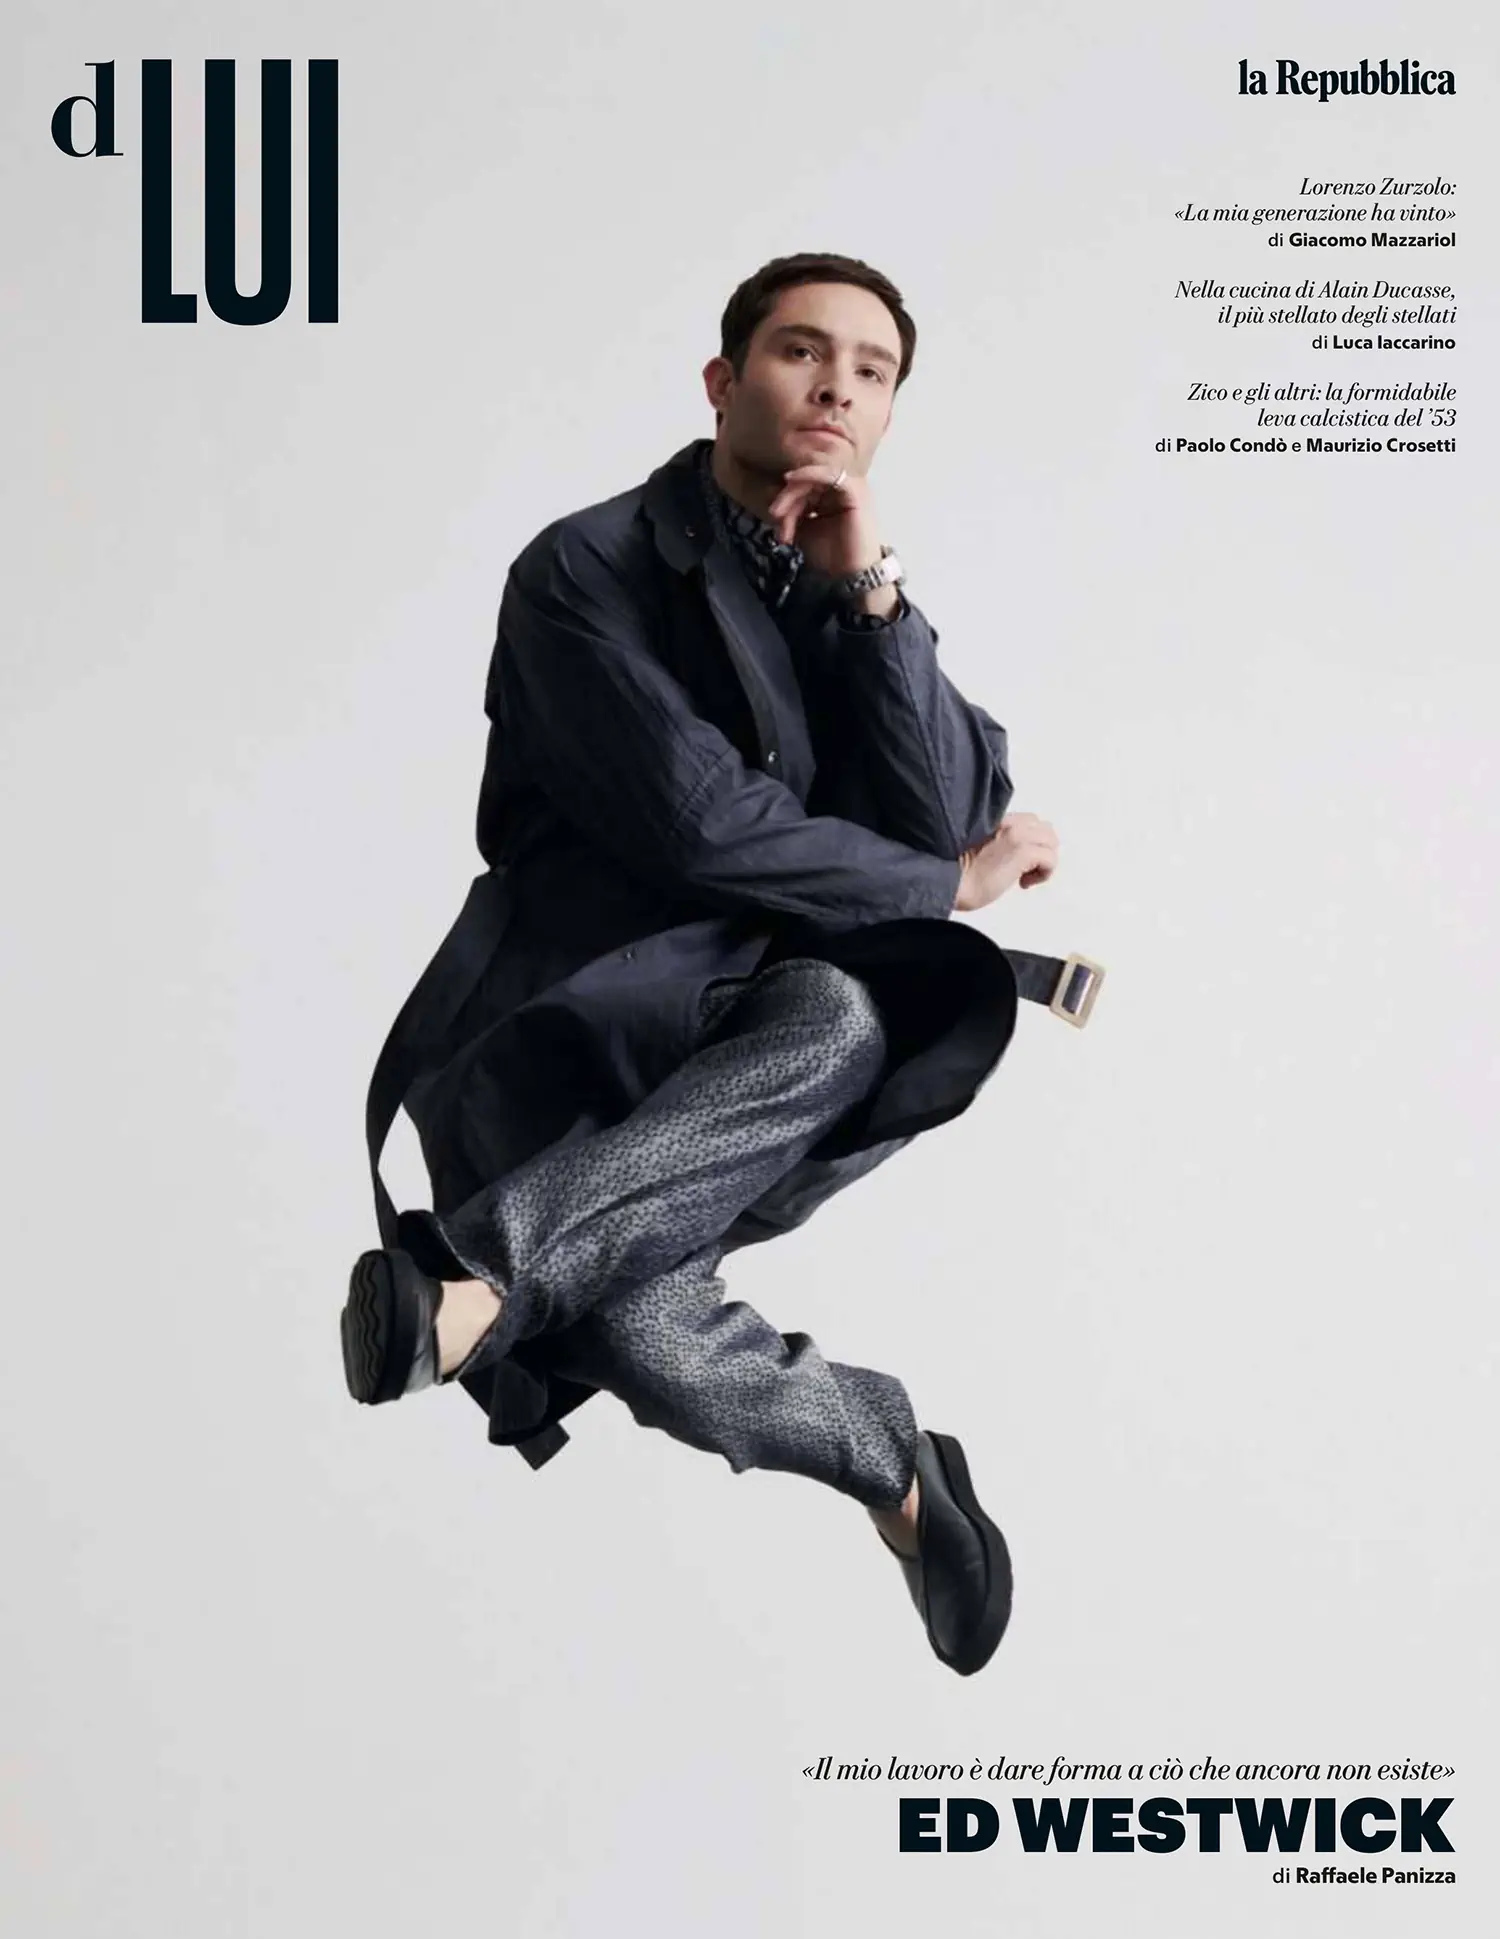 Ed Westwick covers D Lui la Repubblica February 25th, 2023 by Philip Gay